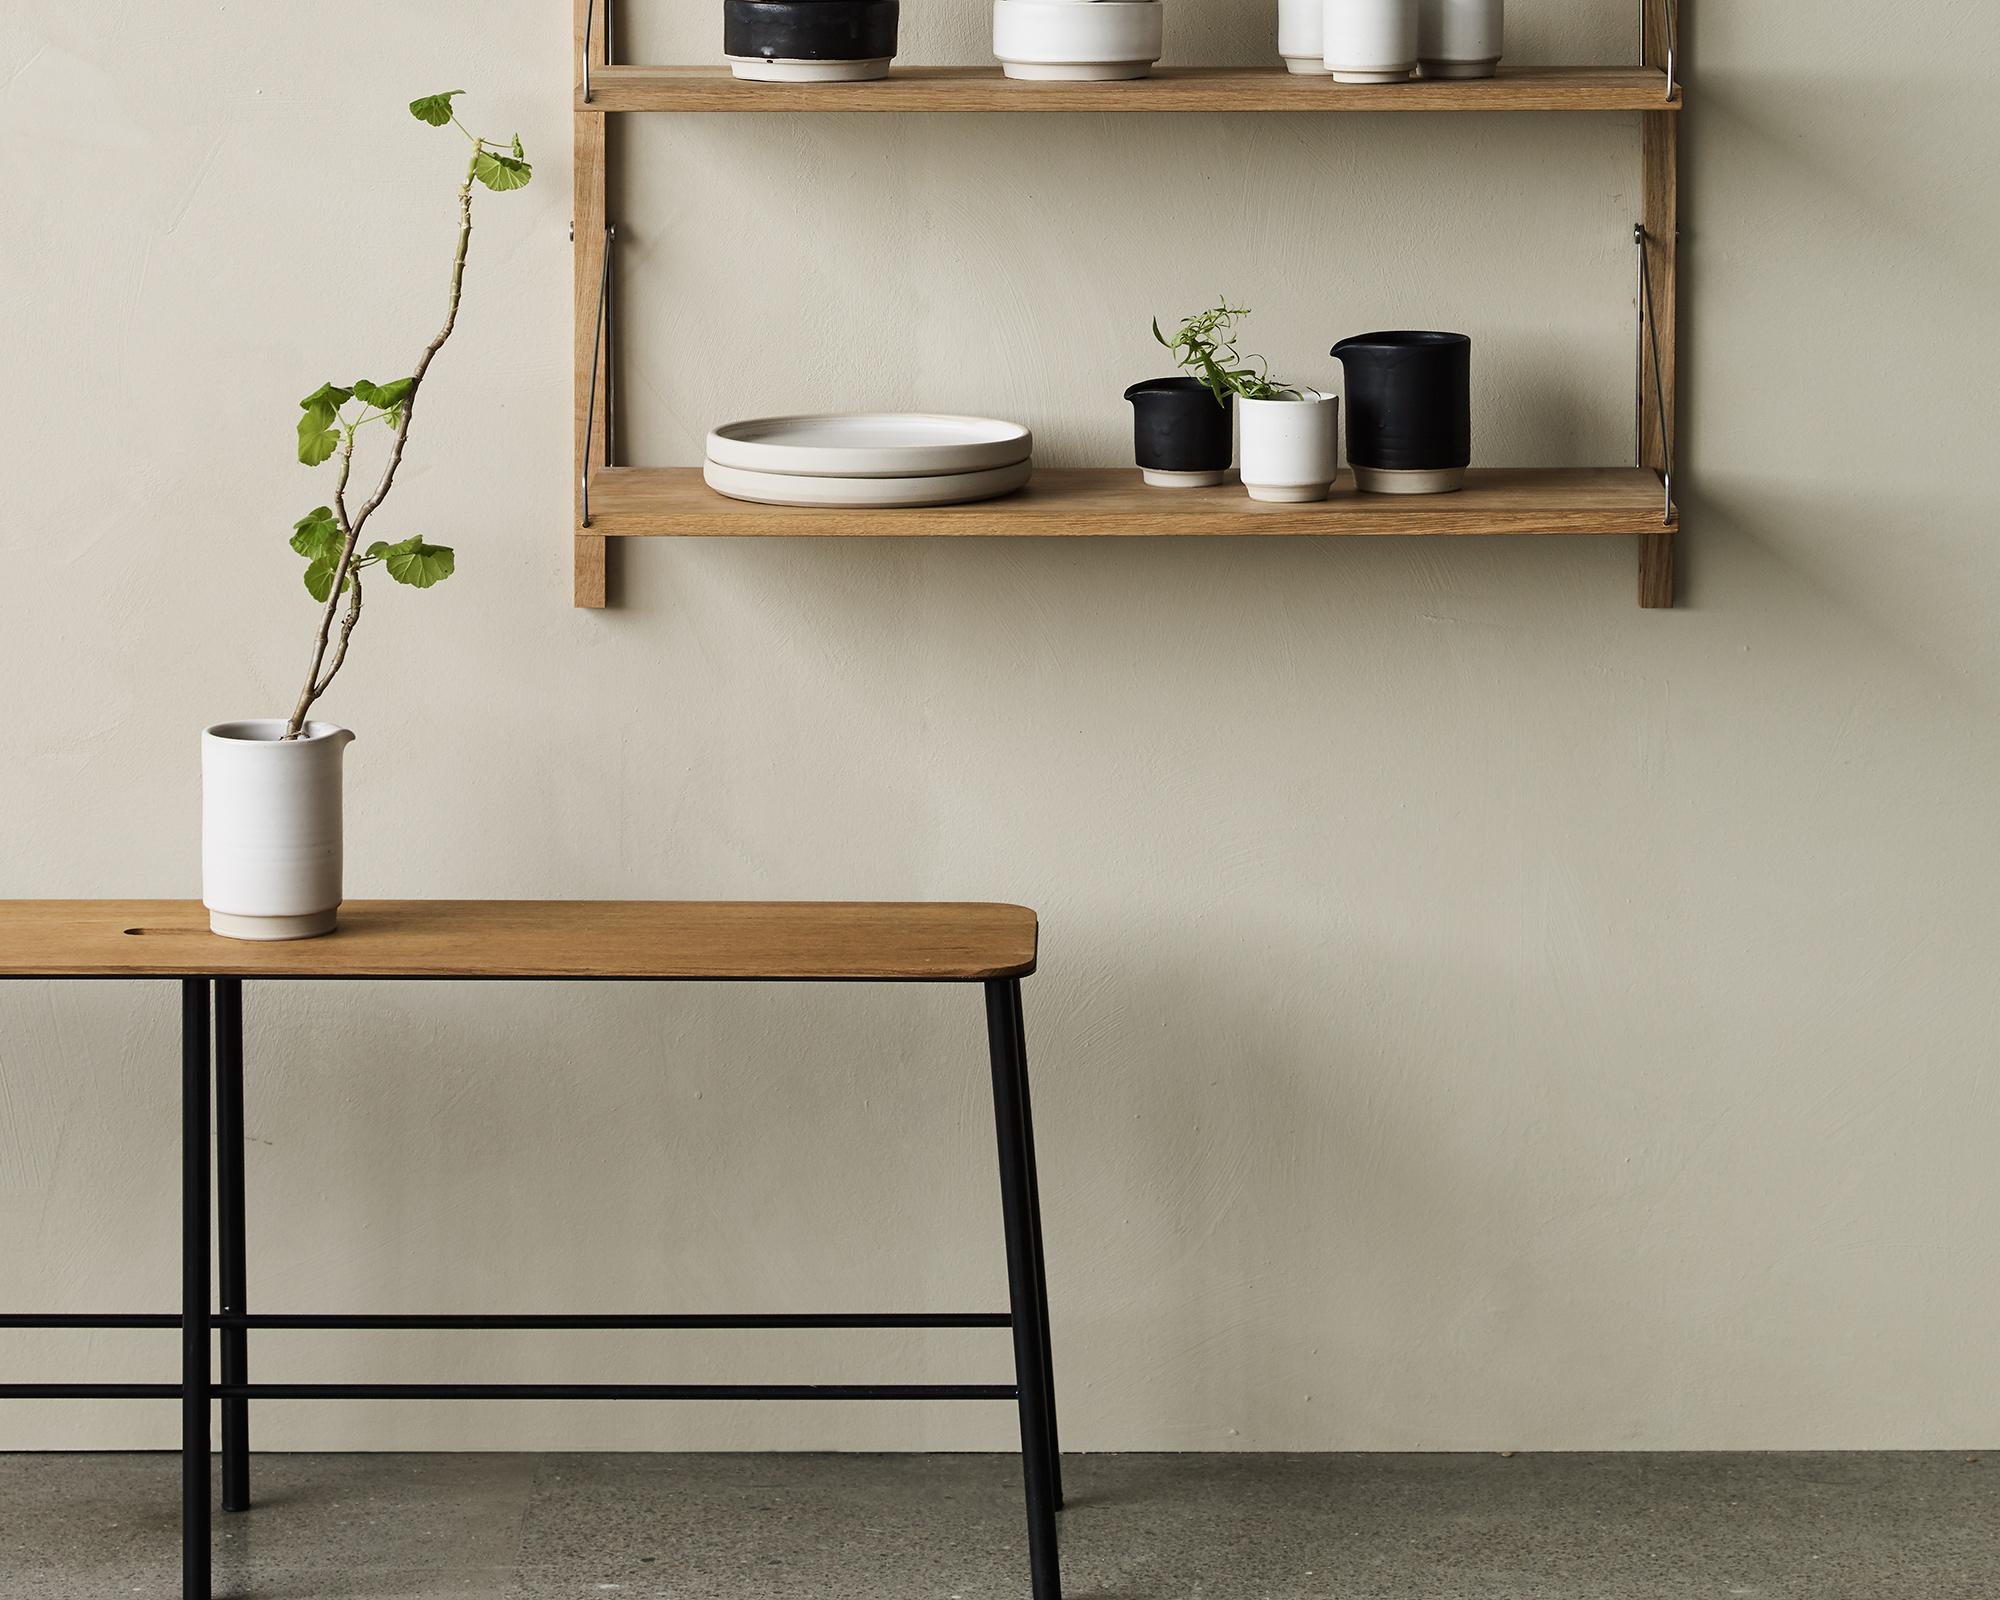 Designed by Toke Lauridsen, the Adam Bench represents classic industrial design aesthetics, embodying a simplistic and understated look that pays homage to solid materials and high functionality. The handsomely sturdy design is perfect for pairing